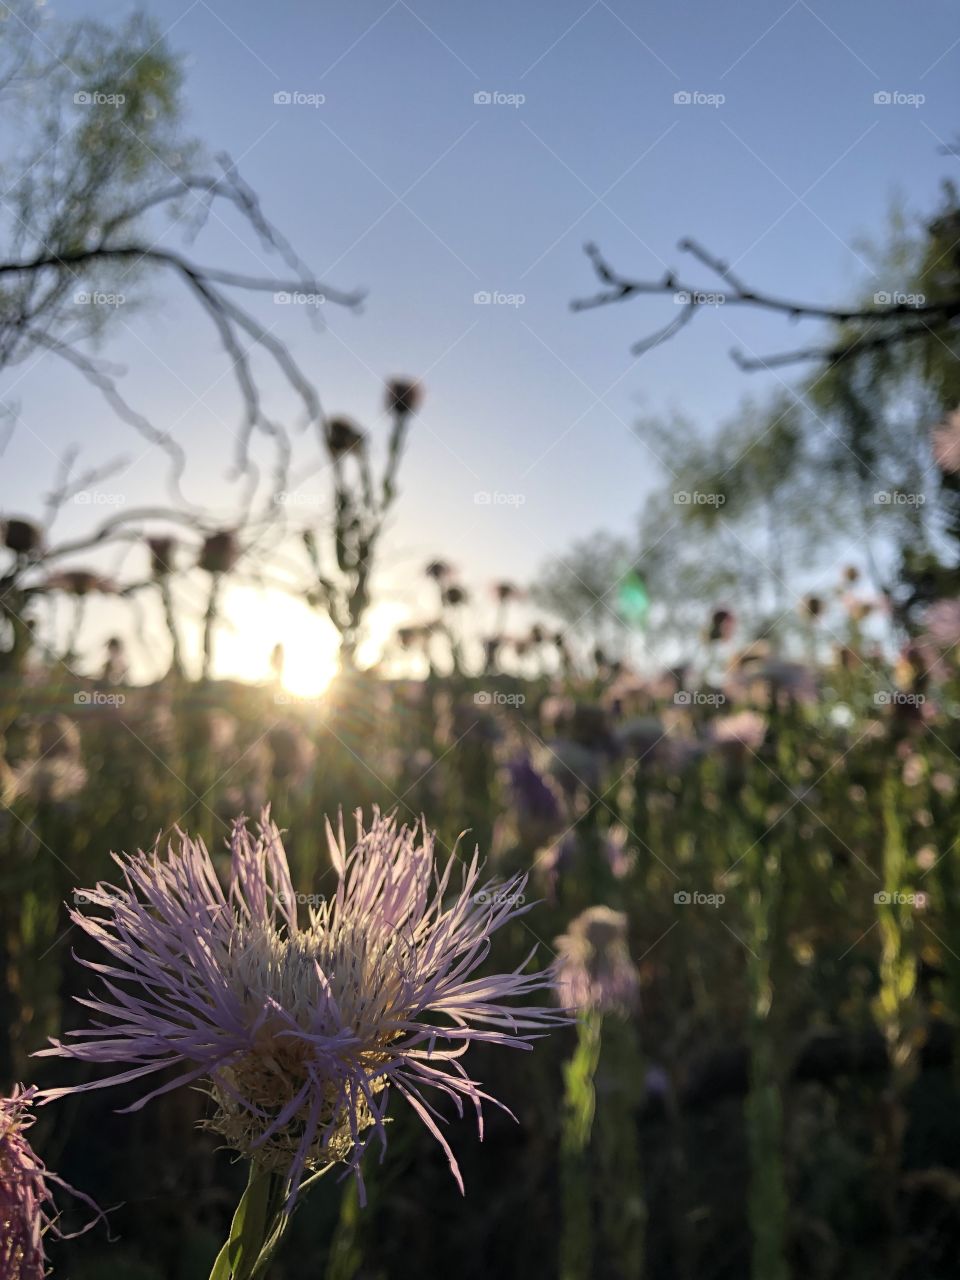 Find beauty in the little things. Purple thistle flower in Palo Duro Canyon State Park:)